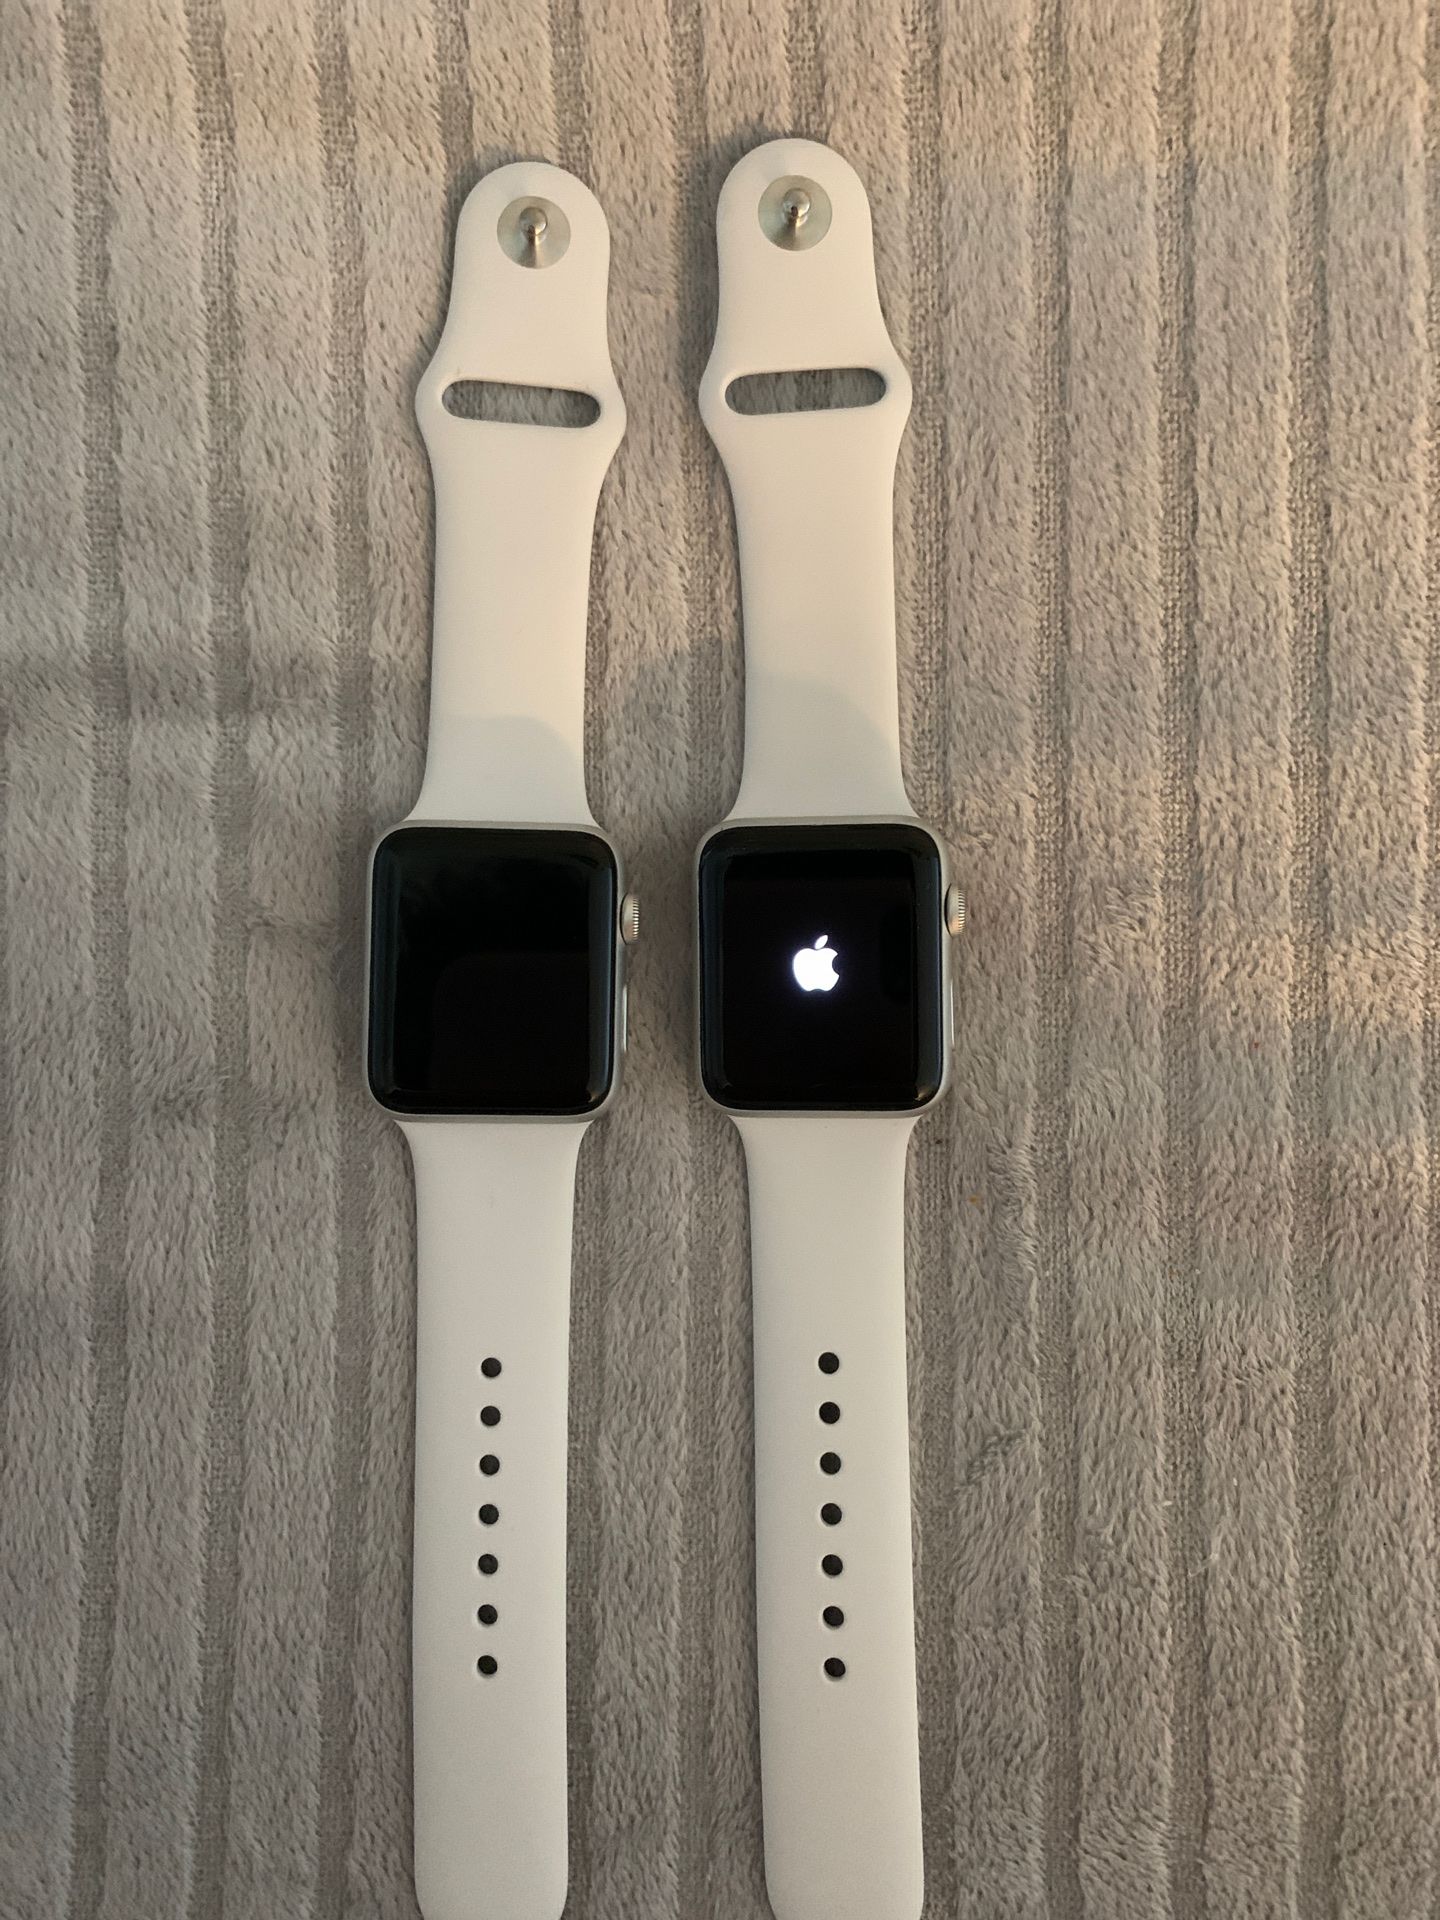 Used, 42mm silver Apple Watch, out of box and charger not included (1 available)